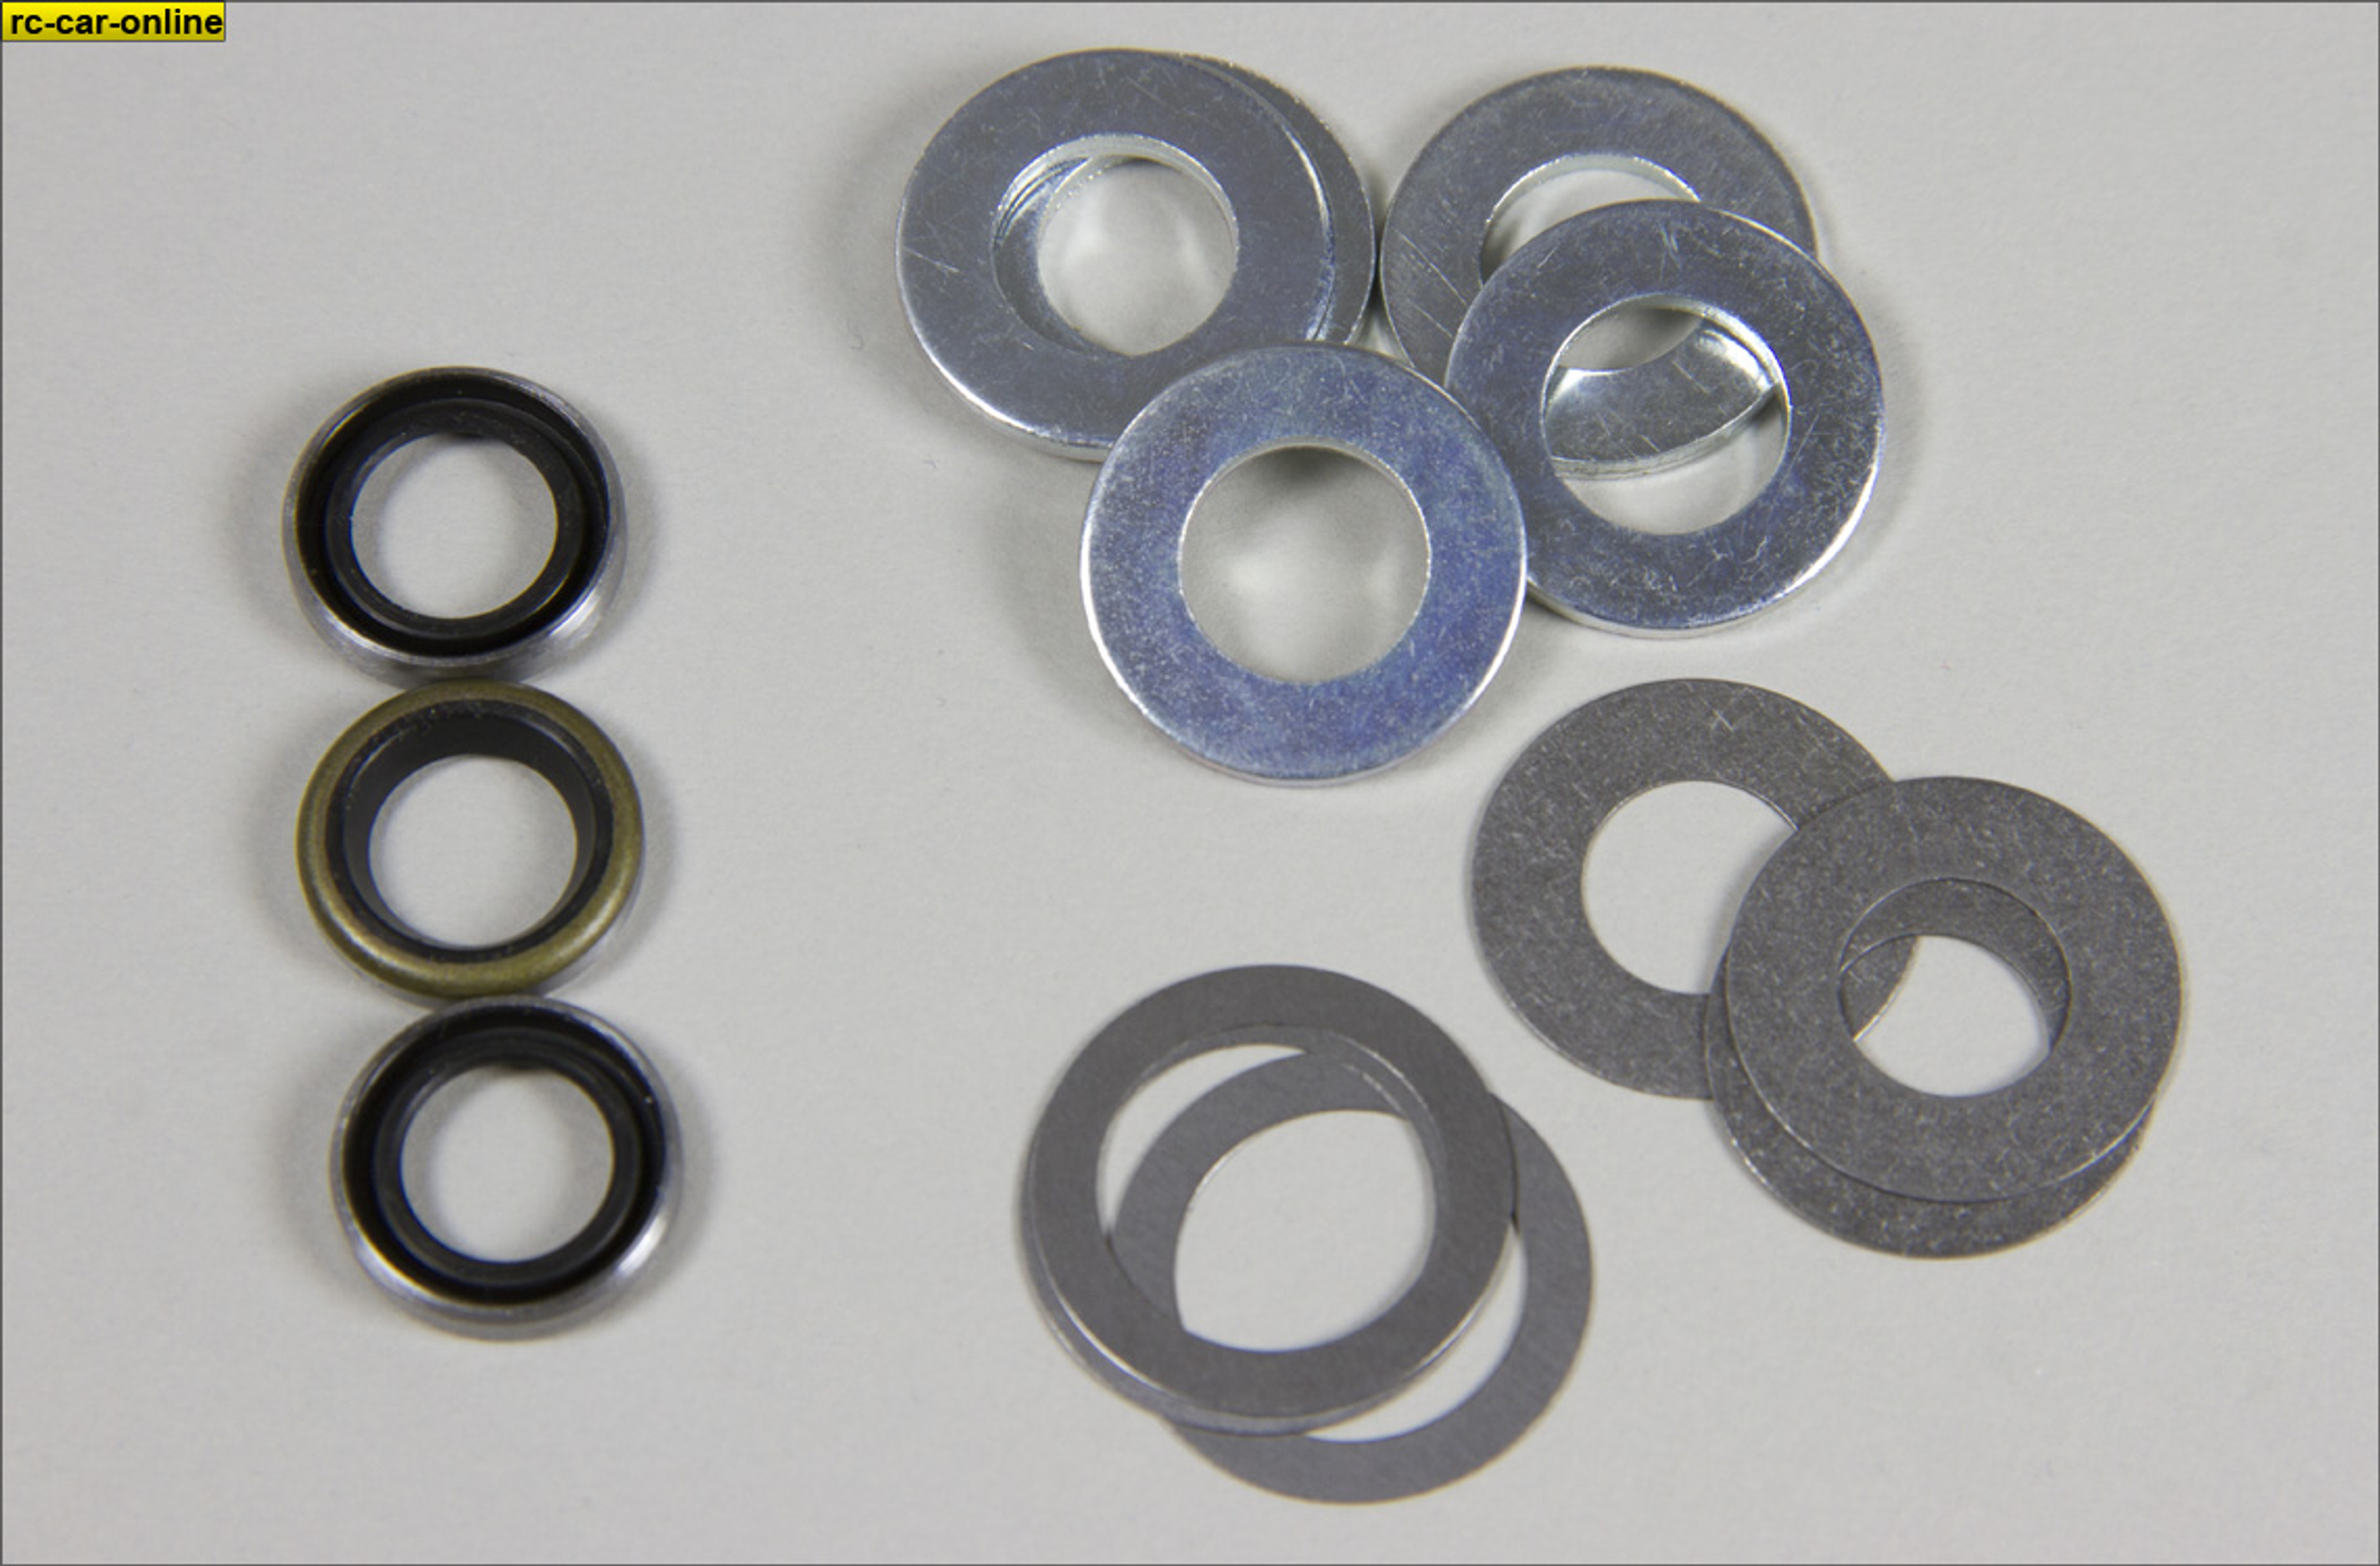 y0203 Shaft seal conversion kit for Losi 5ive-T and Mini differential